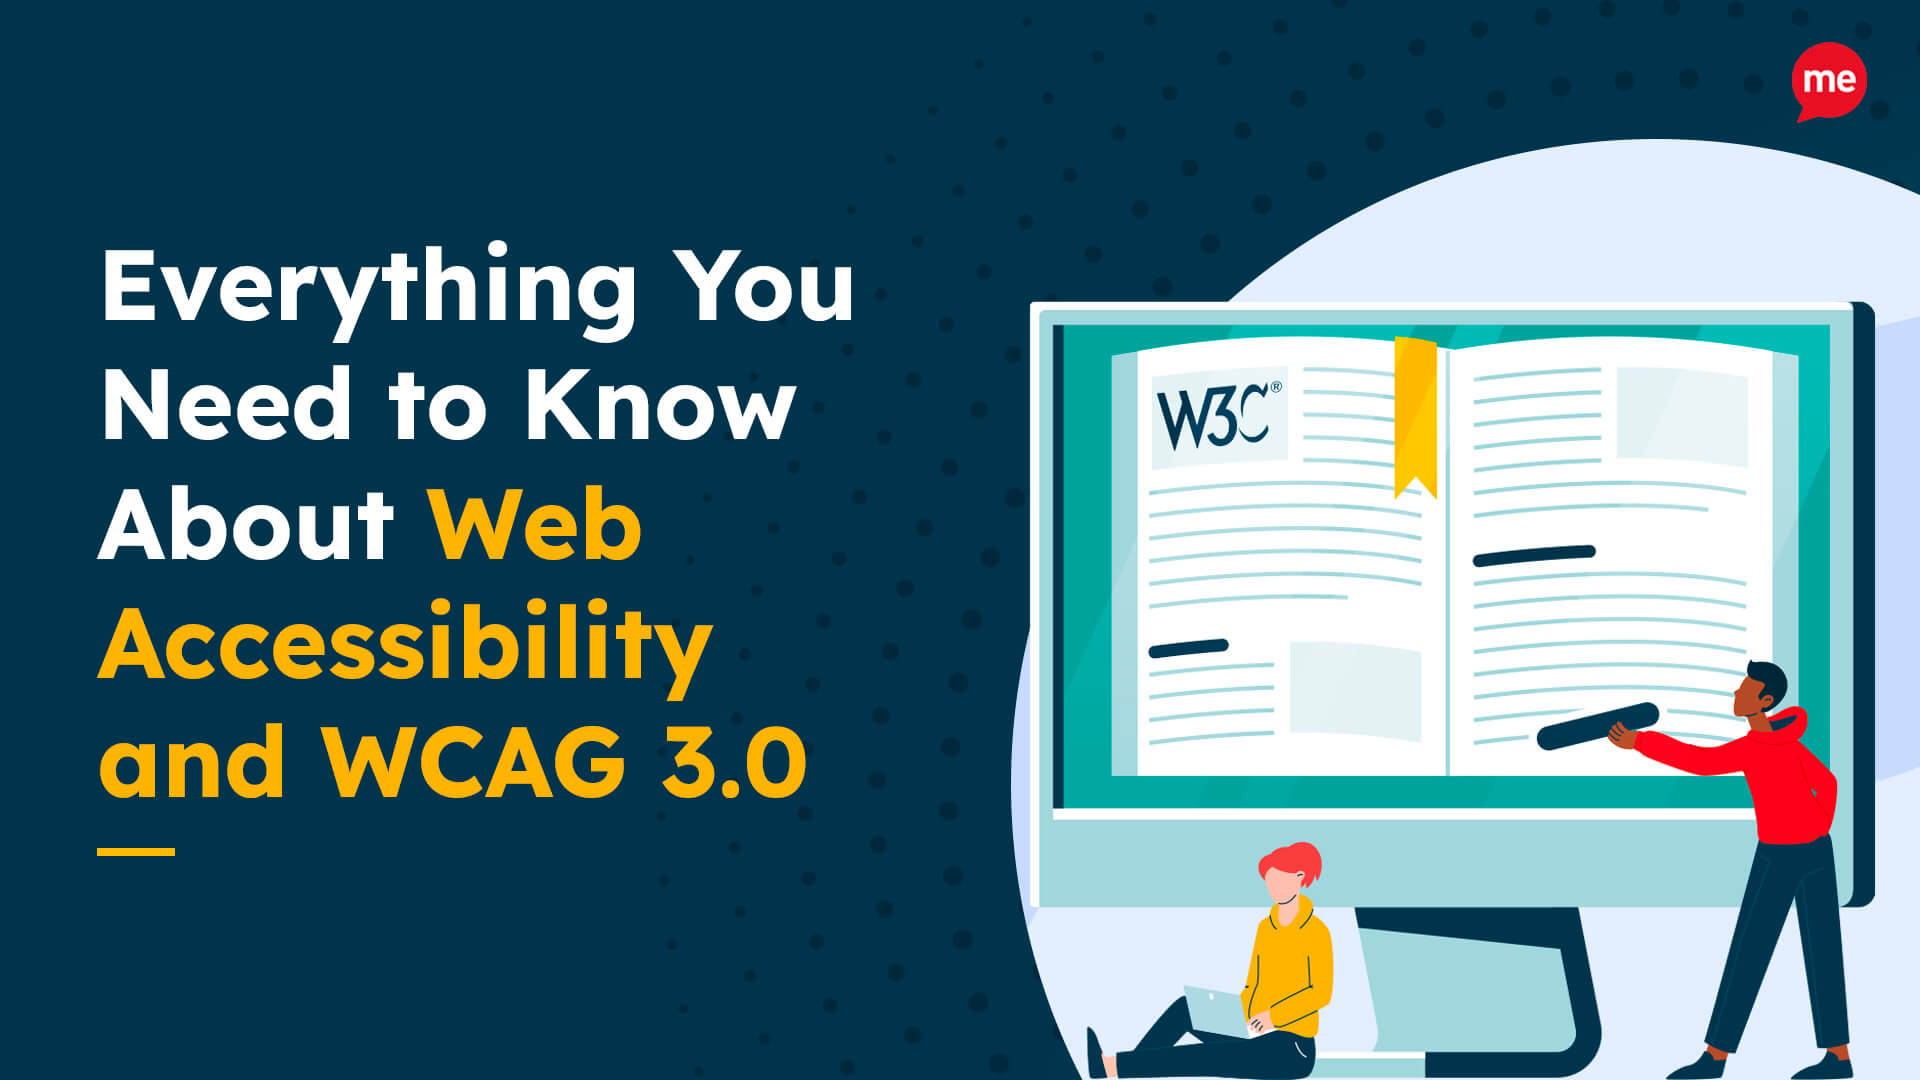 Everything You Need to Know About Web Accessibility and WCAG 3